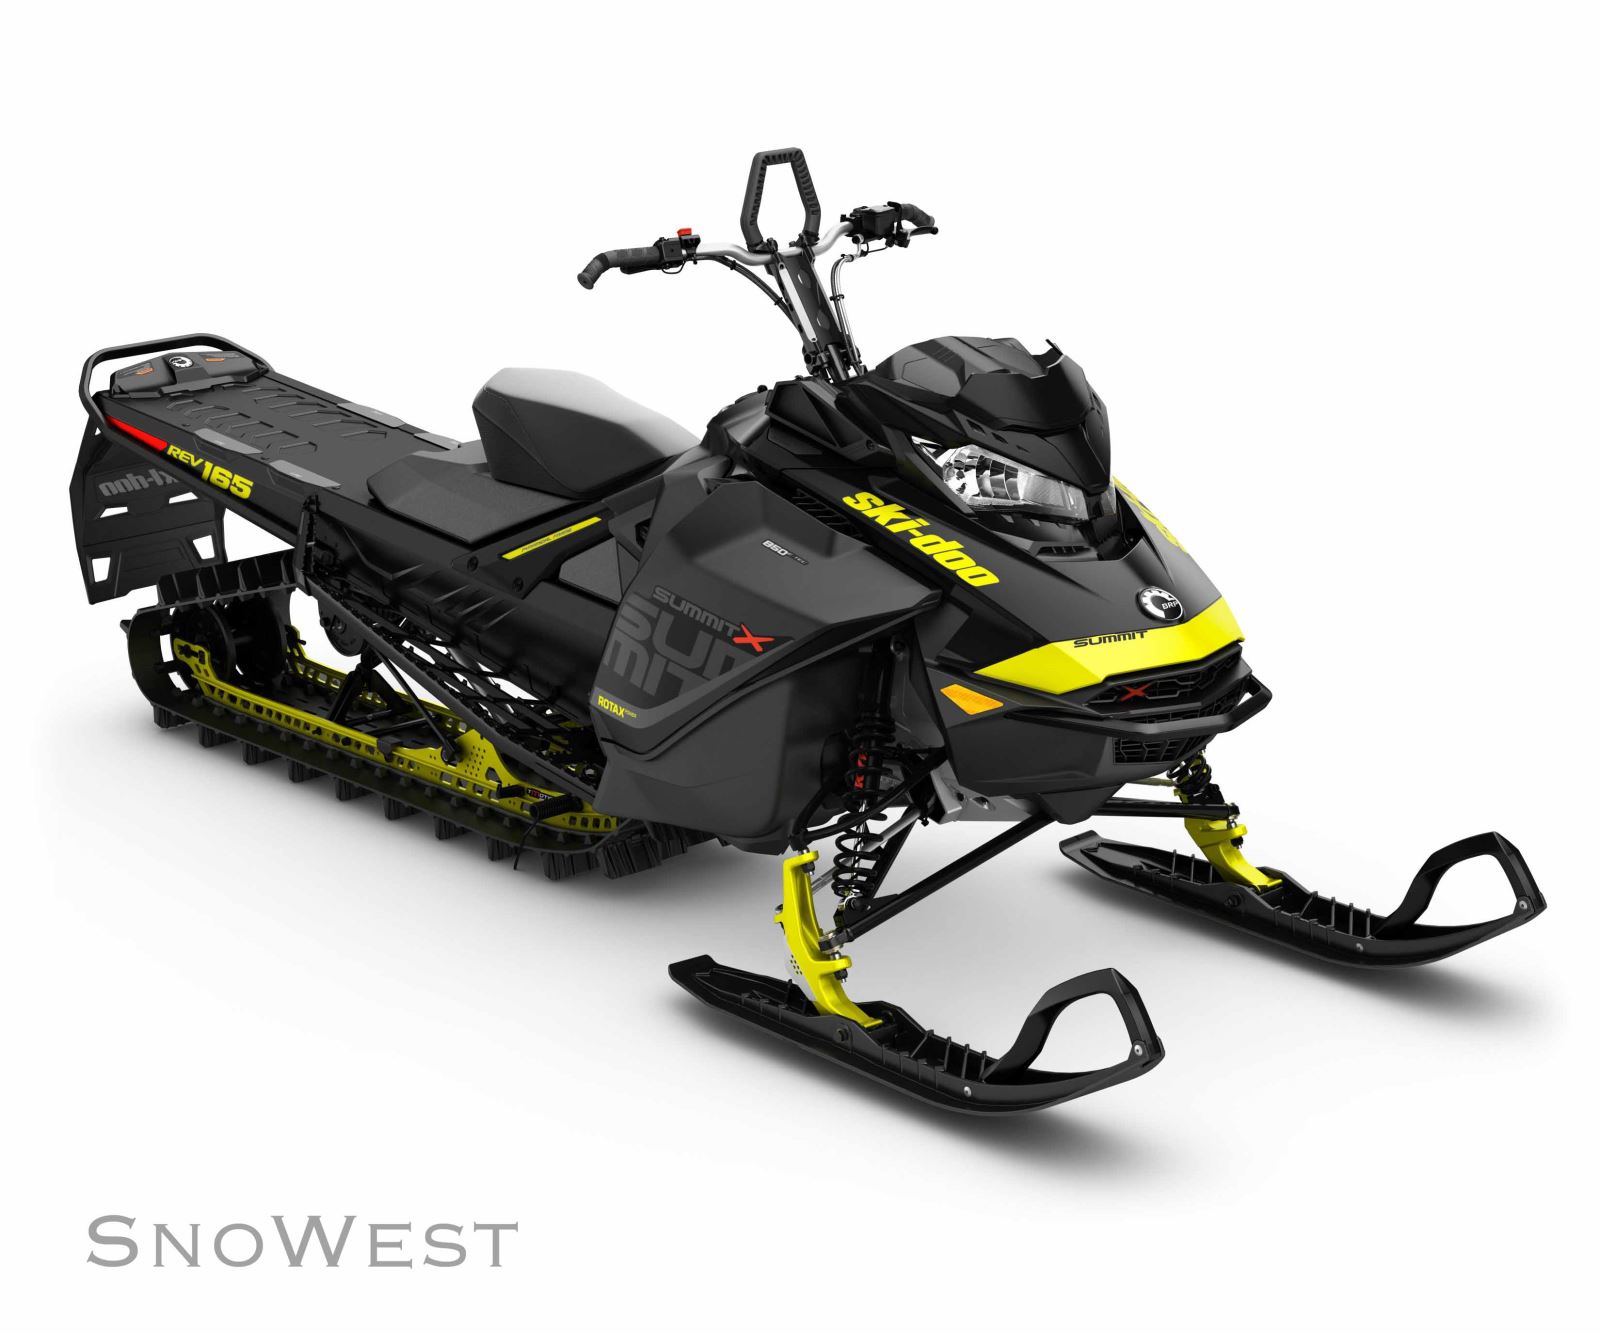 Gallery All the New 2017 SkiDoo Mountain Sleds 2017 SkiDoo Summit